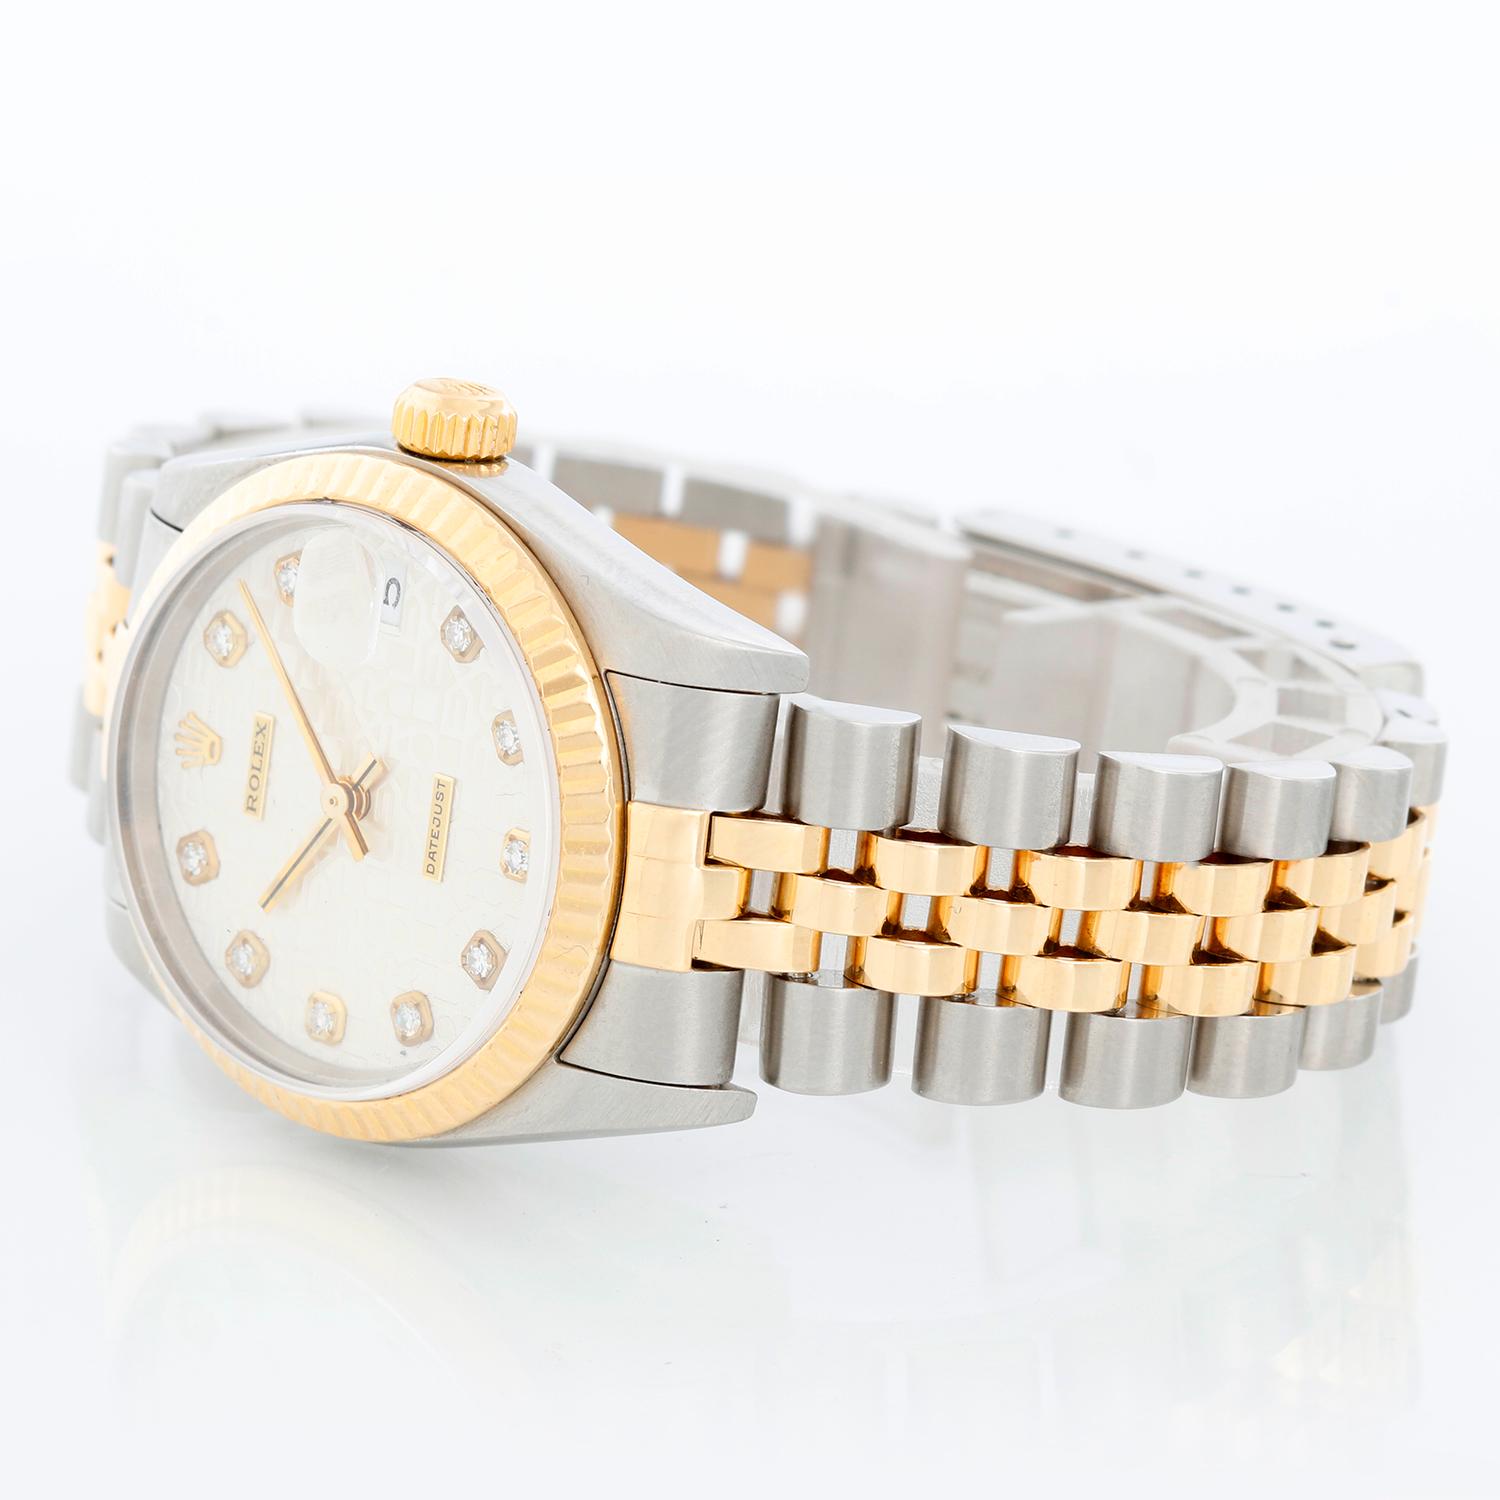 Rolex Datejust Midsize 2-Tone Men's or Ladies Watch 78273 - Automatic winding, 31 jewels, Quickset, sapphire crystal.  Stainless steel case with yellow gold fluted bezel. Silver Jubilee diamond dial. Stainless steel and 18k yellow gold Jubilee